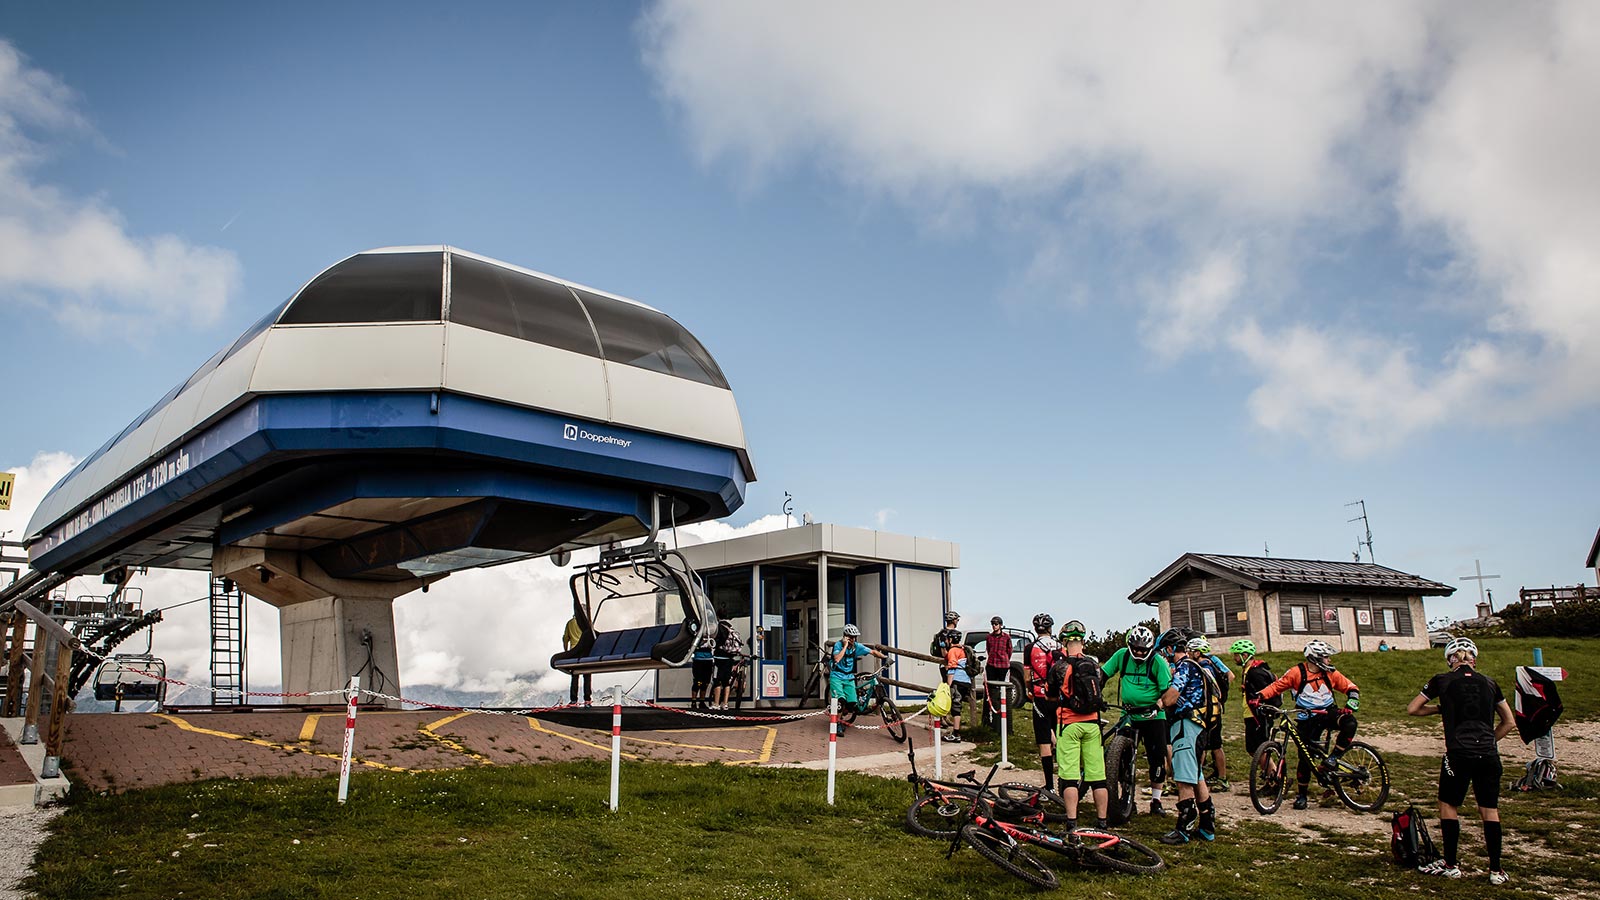 View of the chairlift and some cyclists in Andalo in Trentino